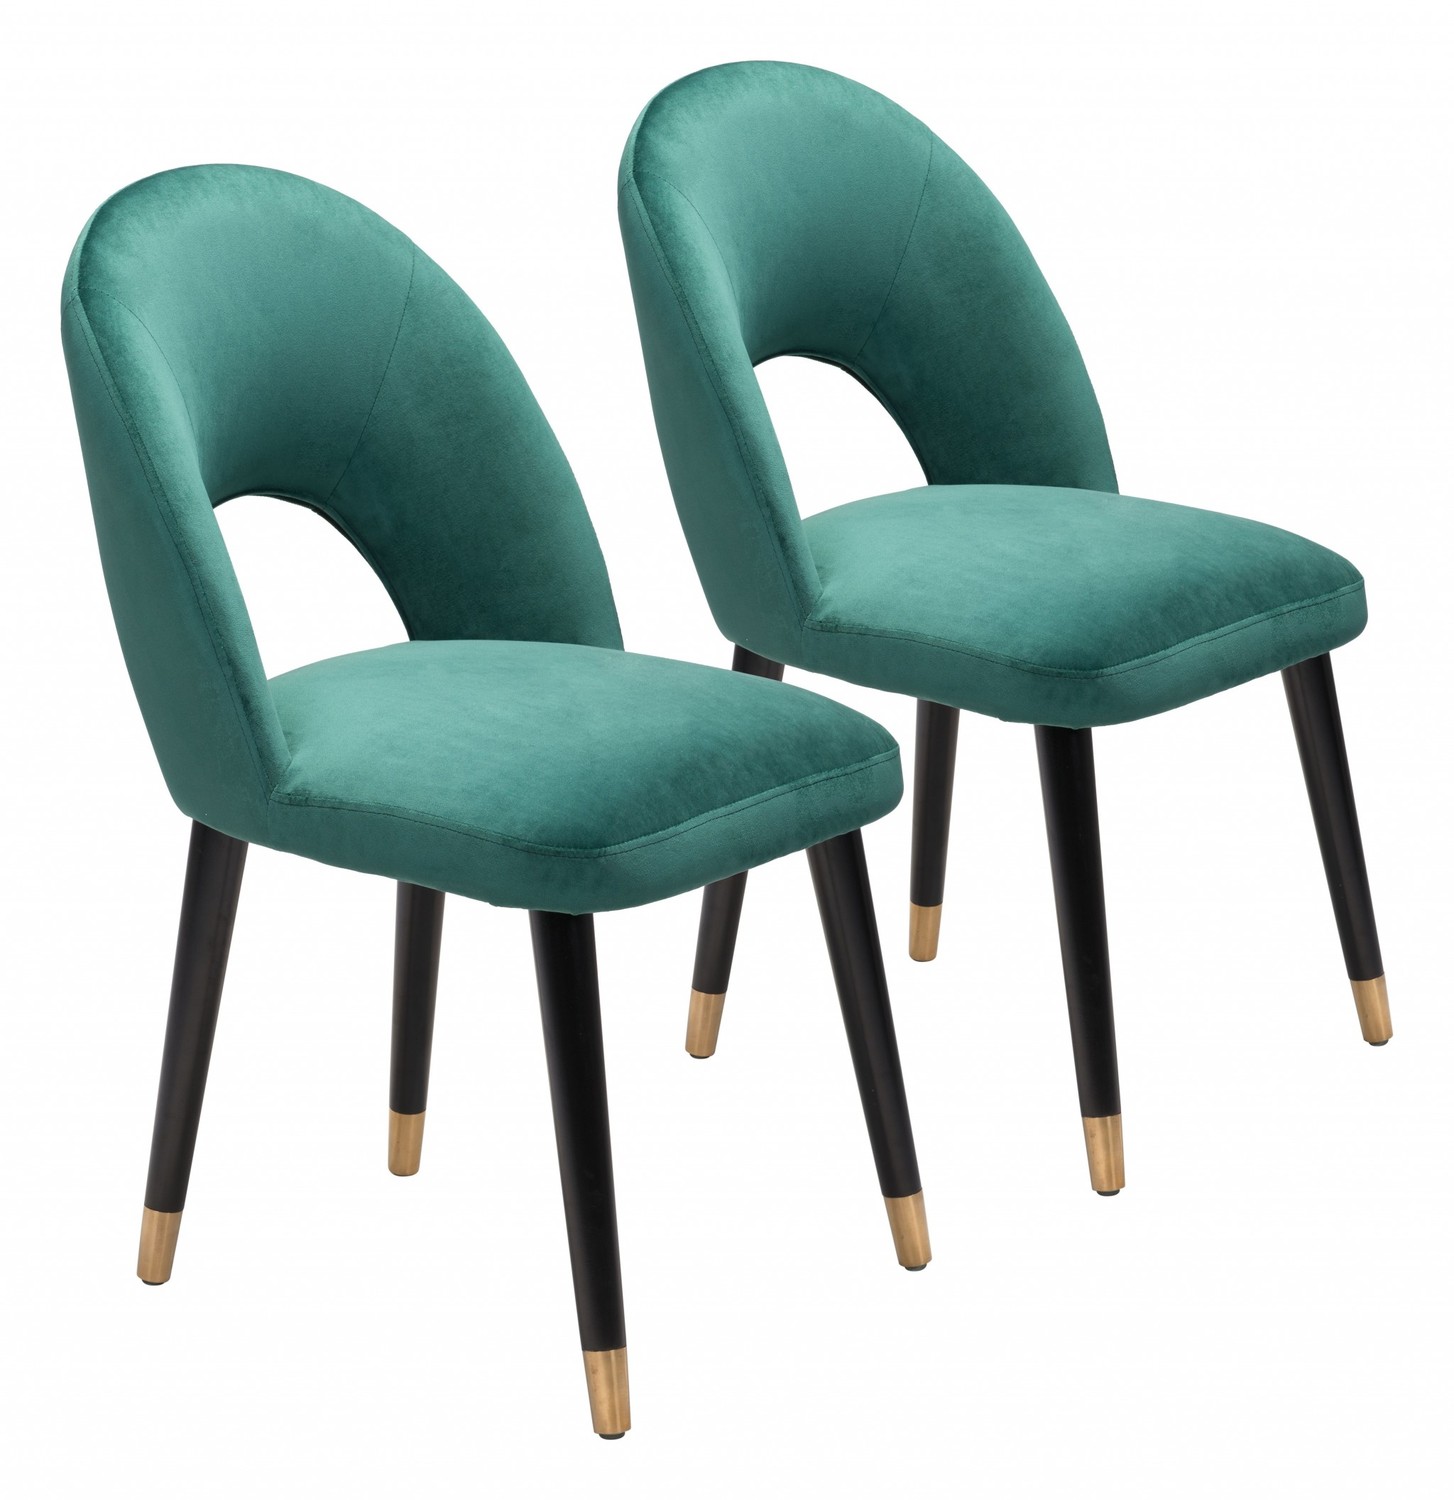 Set of Two Teal Green Thick Loop Back Dining Chairs